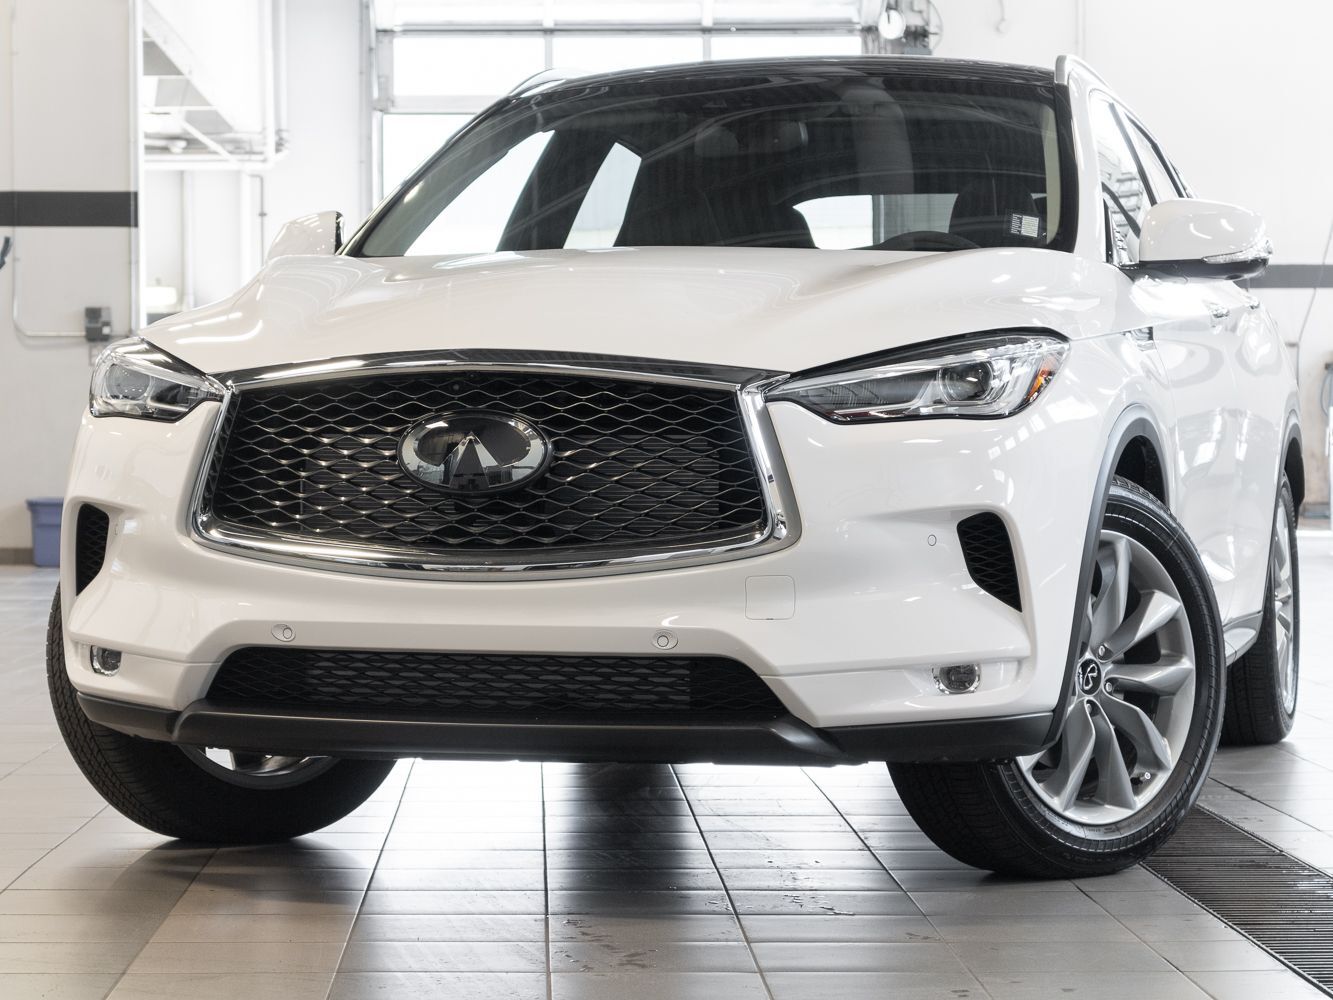 2020 Infiniti QX50 2.0T Essential AWD with Convenience Package